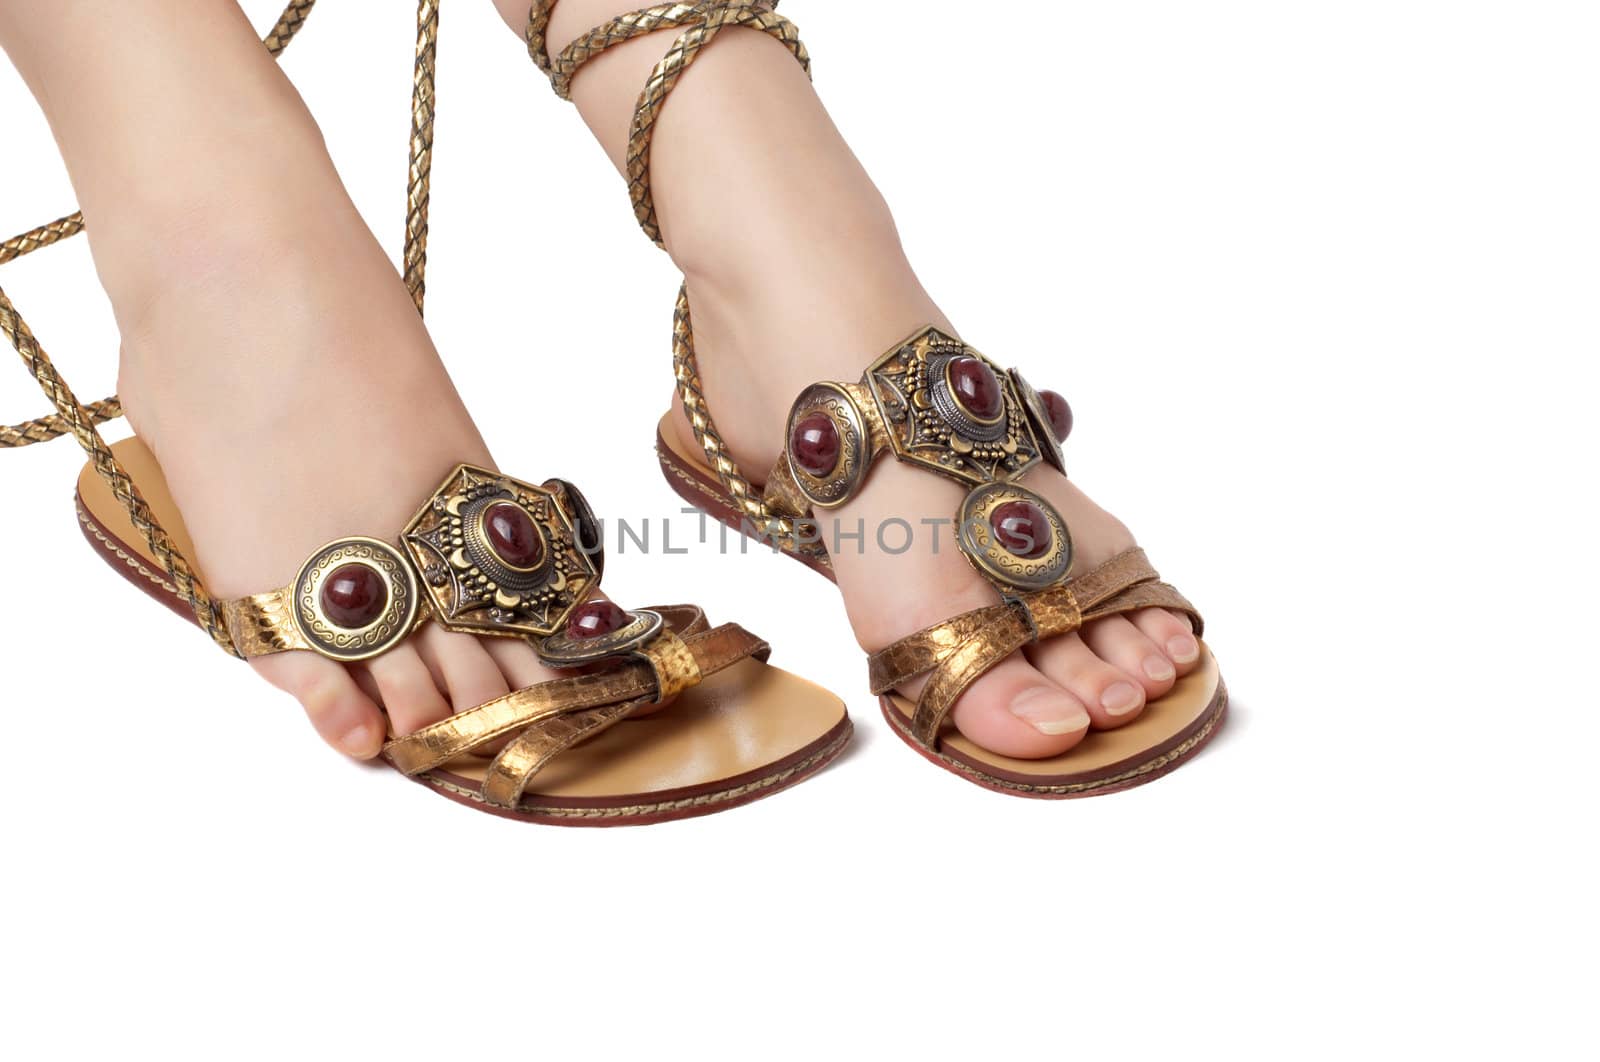 decorated sandals by starush